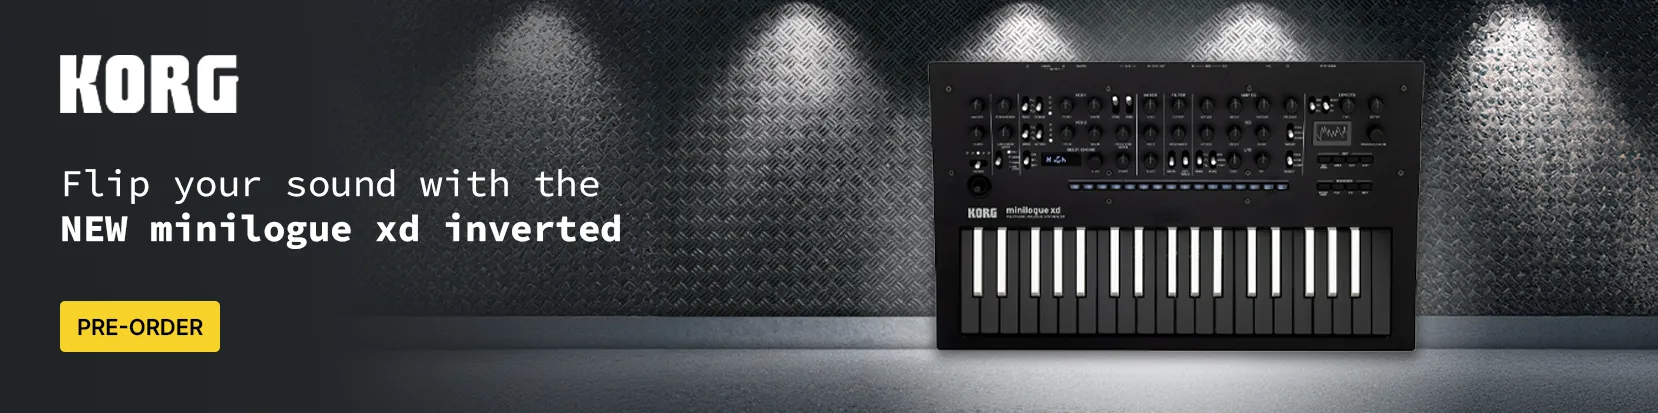 Korg Flip your sound with the new minilogue xd inverted